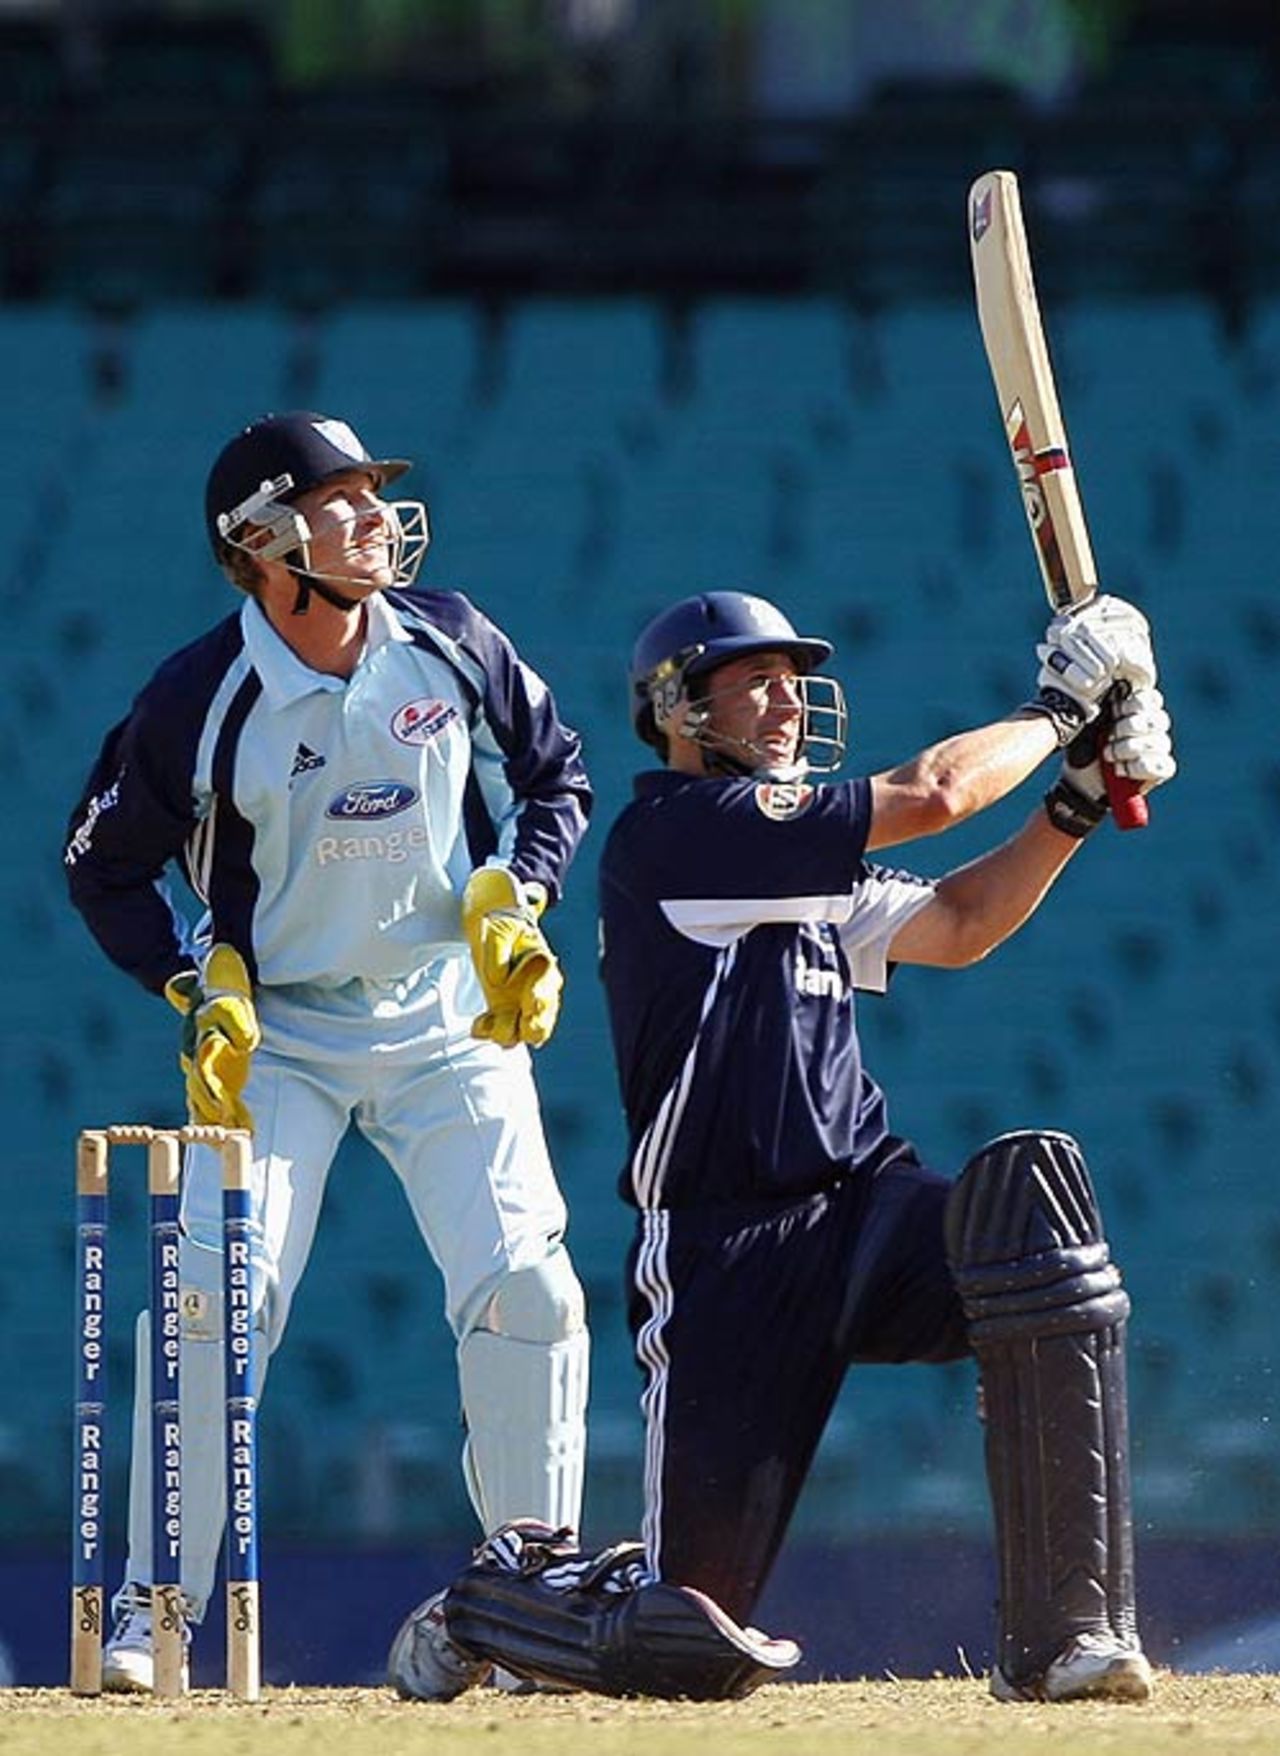 David Hussey launches another six during his 60-ball century, New South Wales v Victoria, Sydney, February 20, 2008